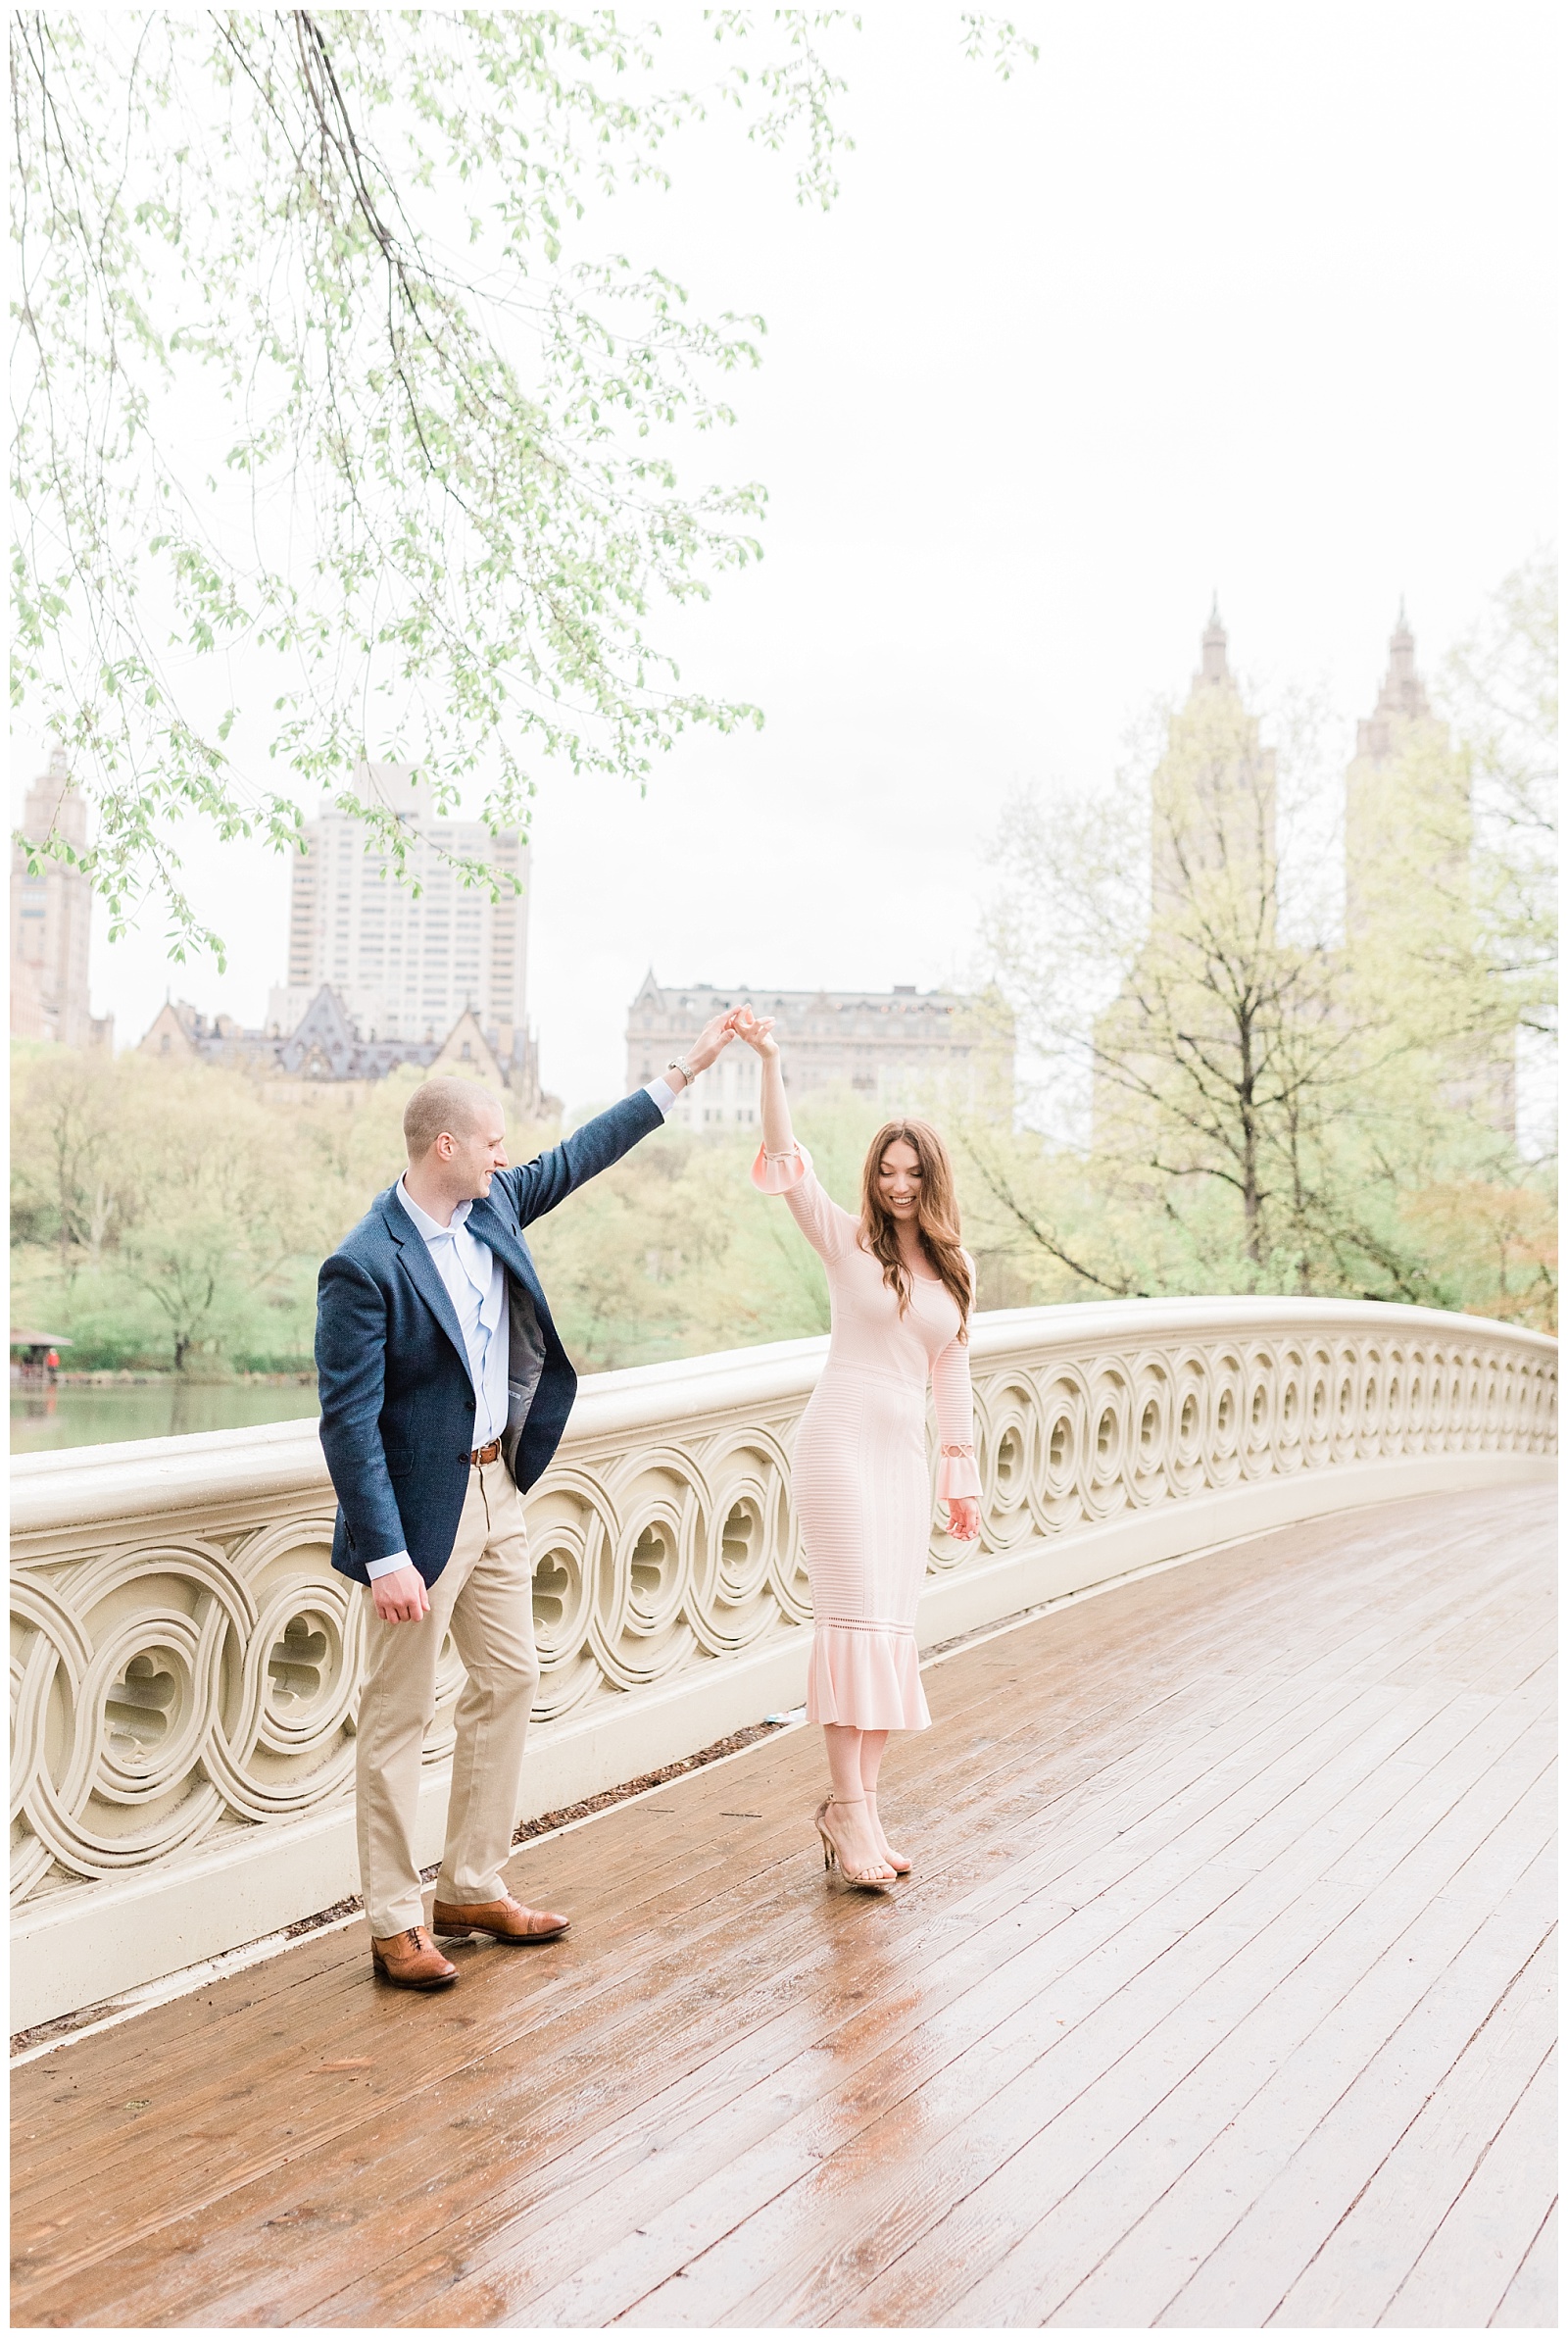 A man twirls his fiance while they slow dance on Bow Bridge in Central Park.